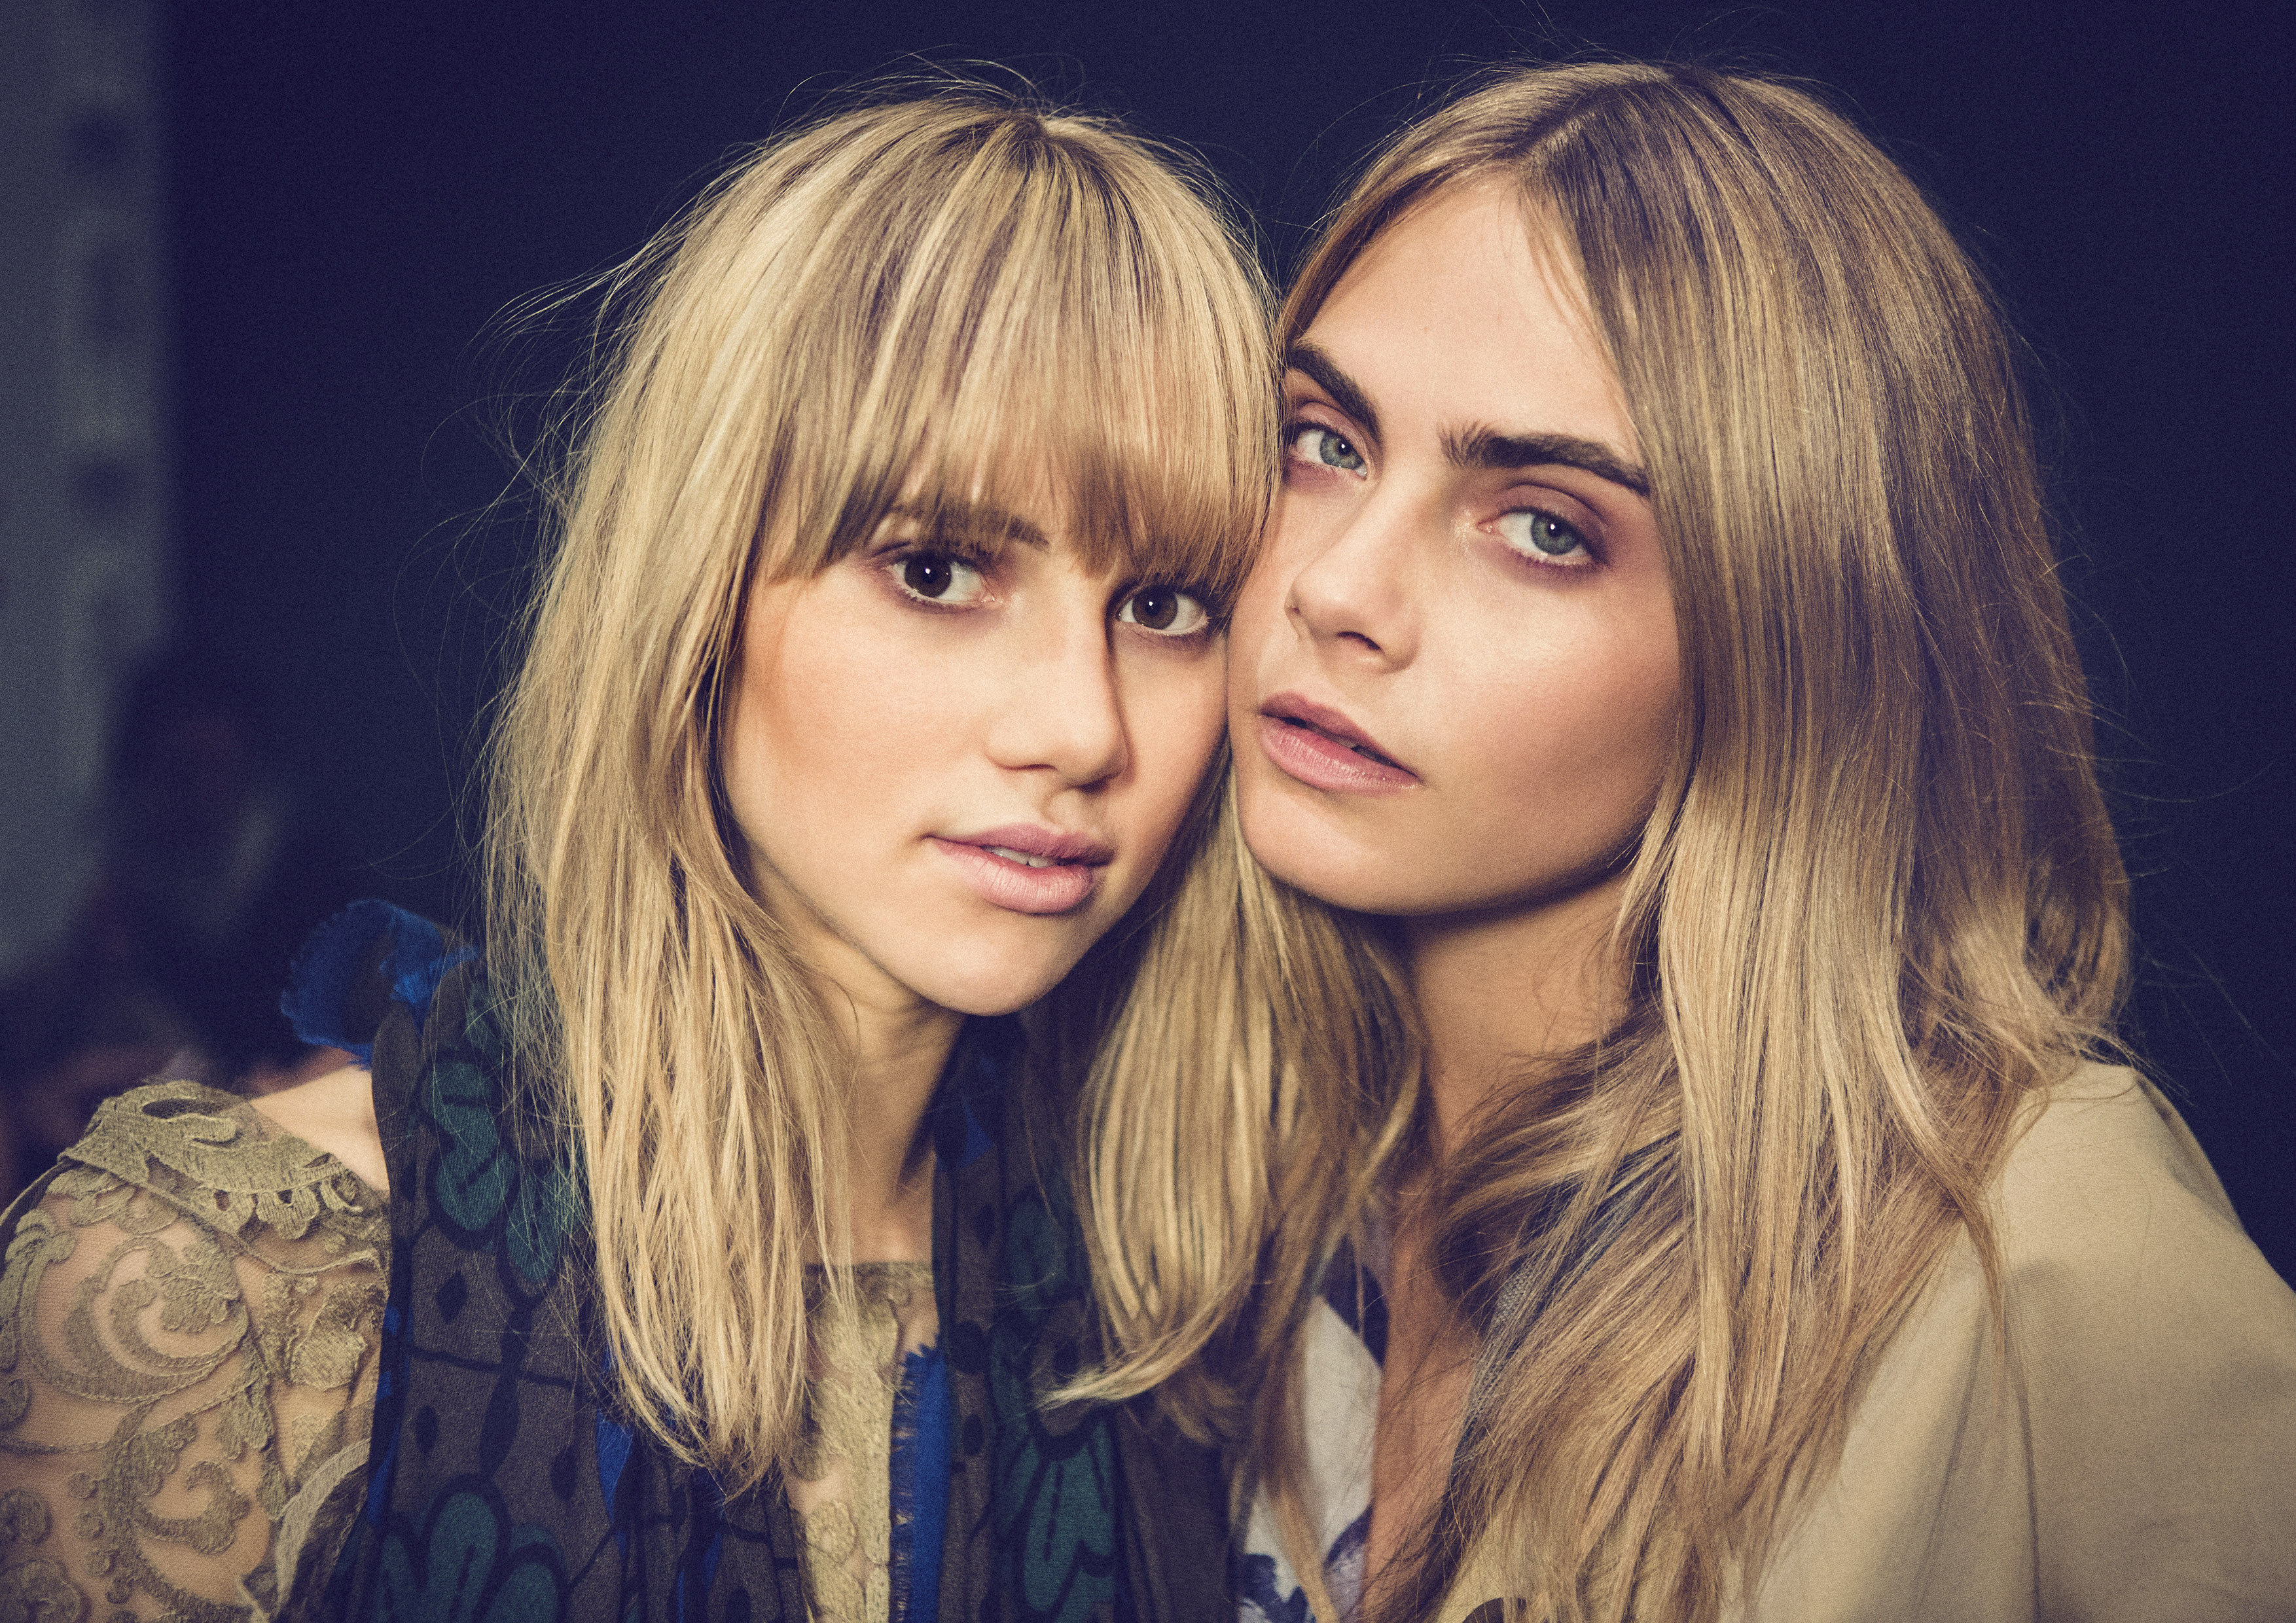 Cara Delevingne and Suki Waterhouse for Burberry